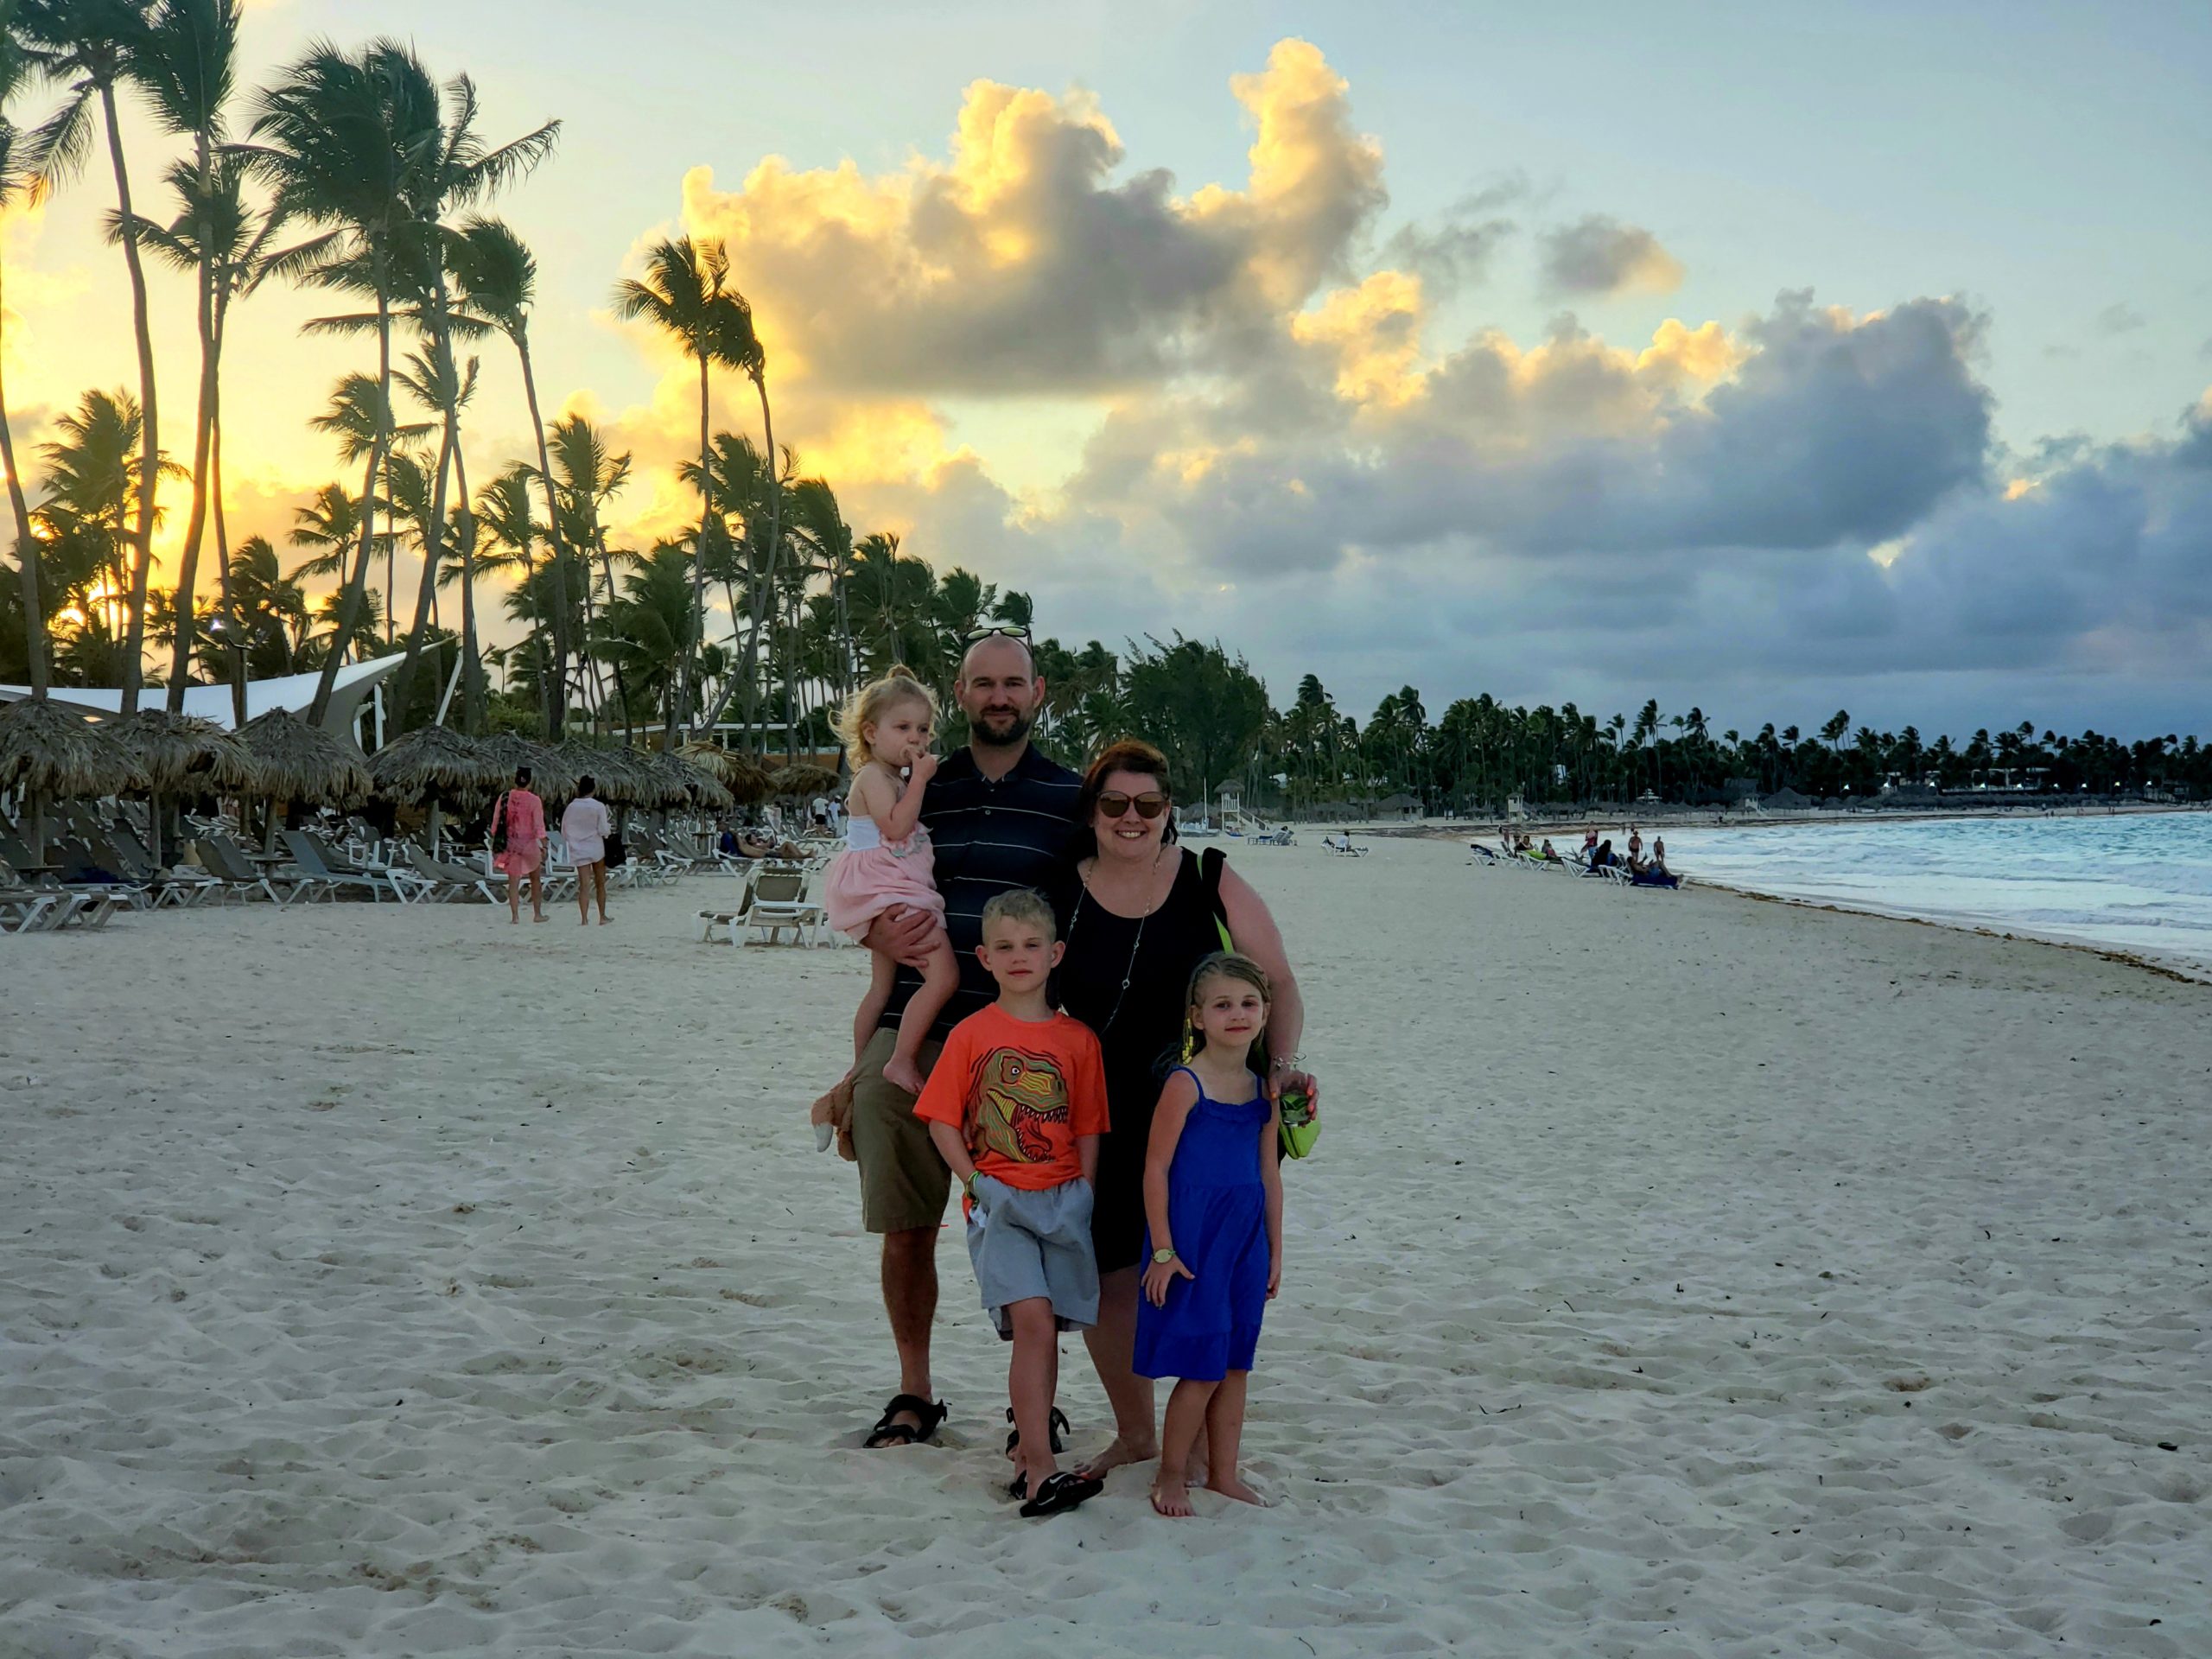 Danielle, her husband, and three kids smiling at the camera on a beach